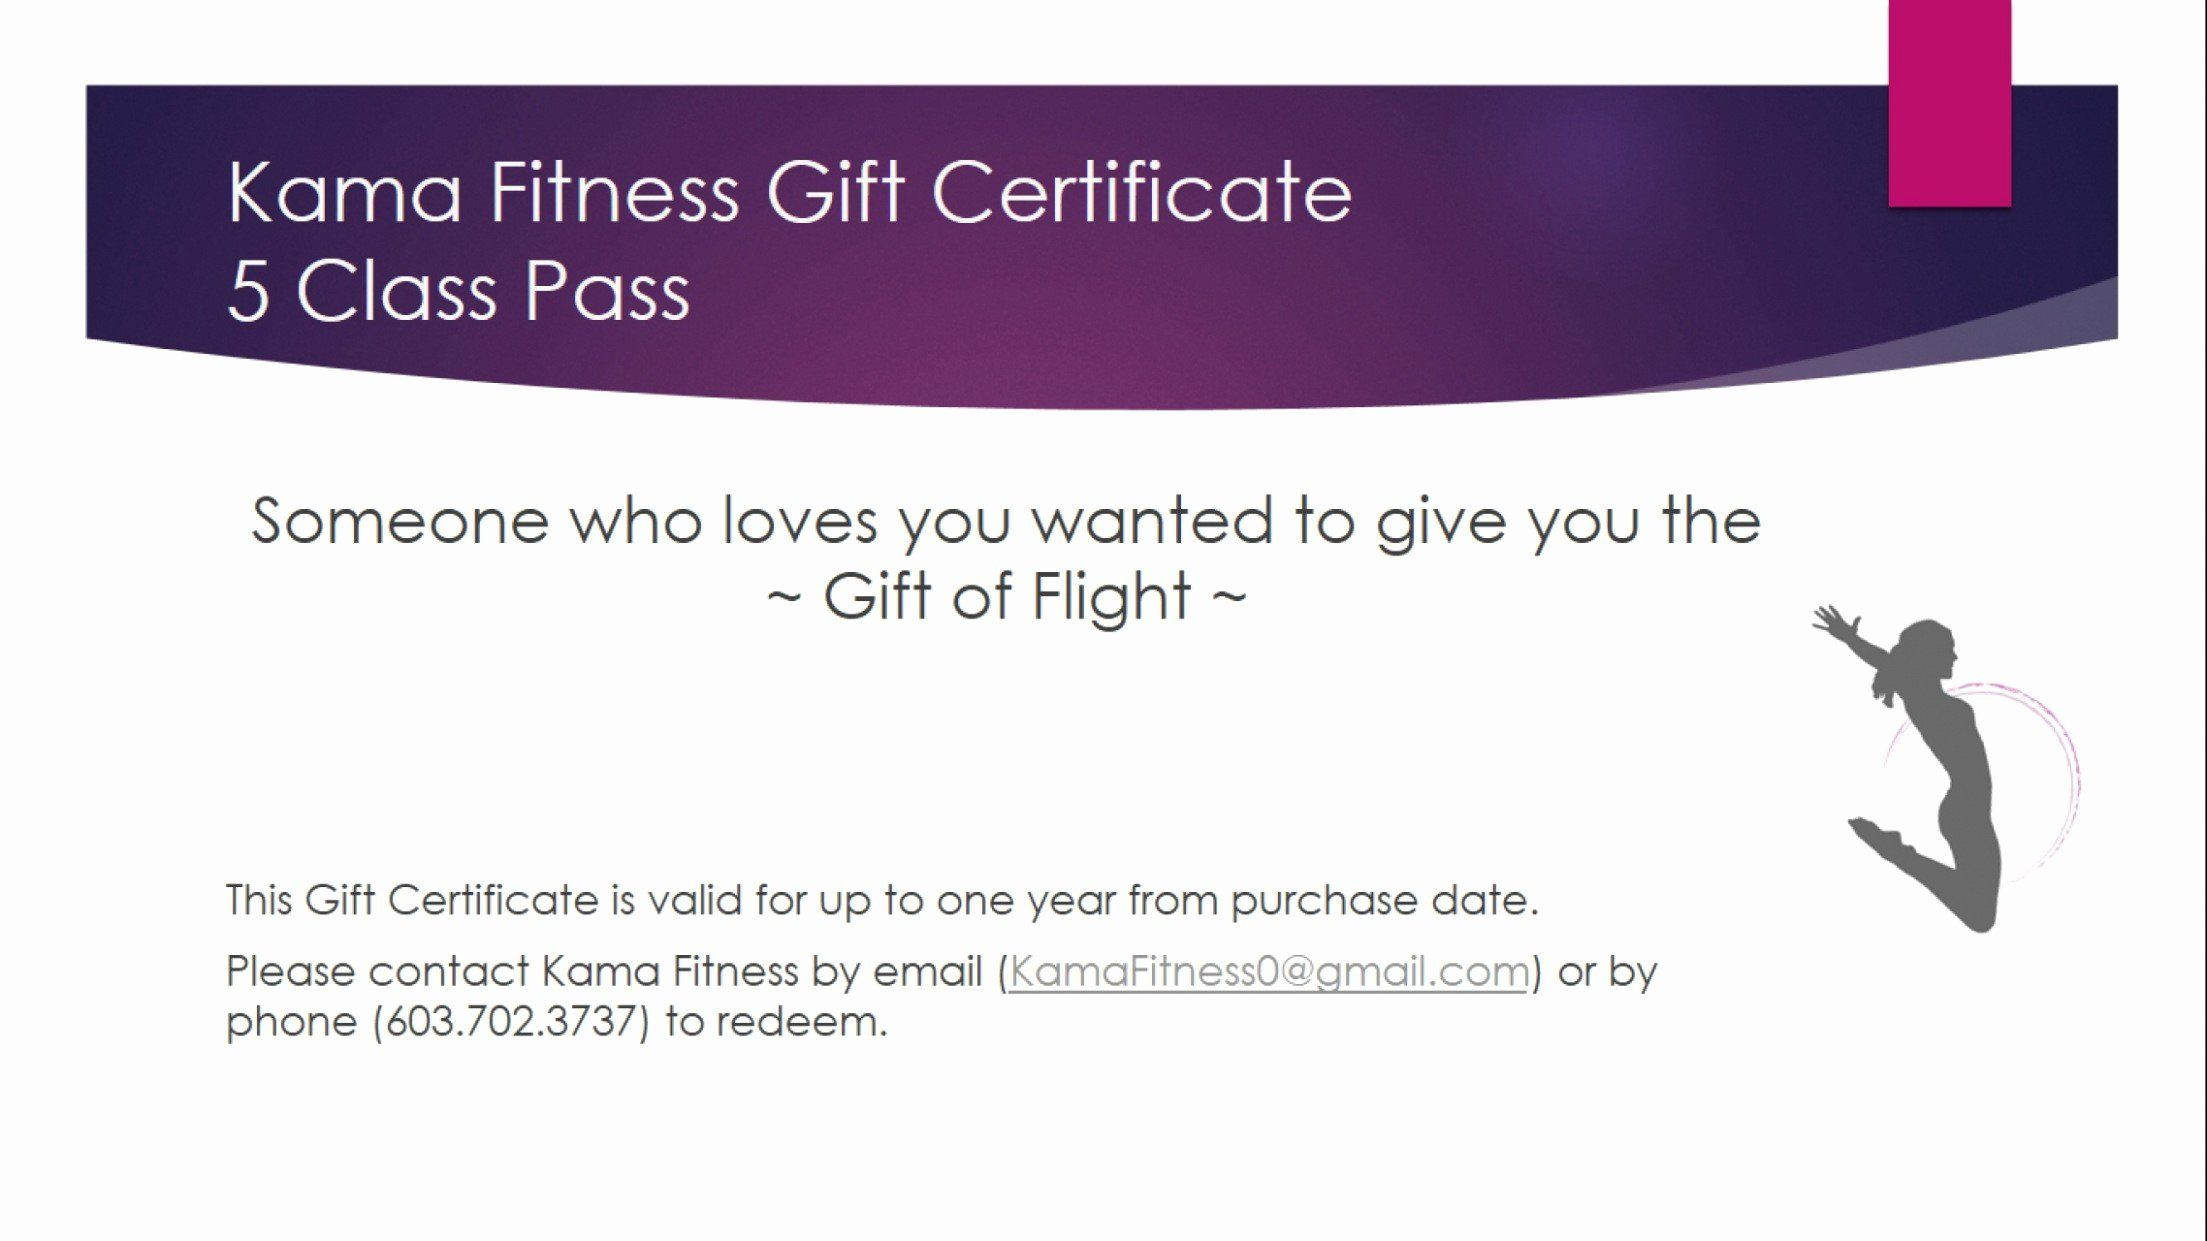 Free Fitness Gift Certificate Template - Oahubeachweddings throughout Stunning Fitness Gift Certificate Template